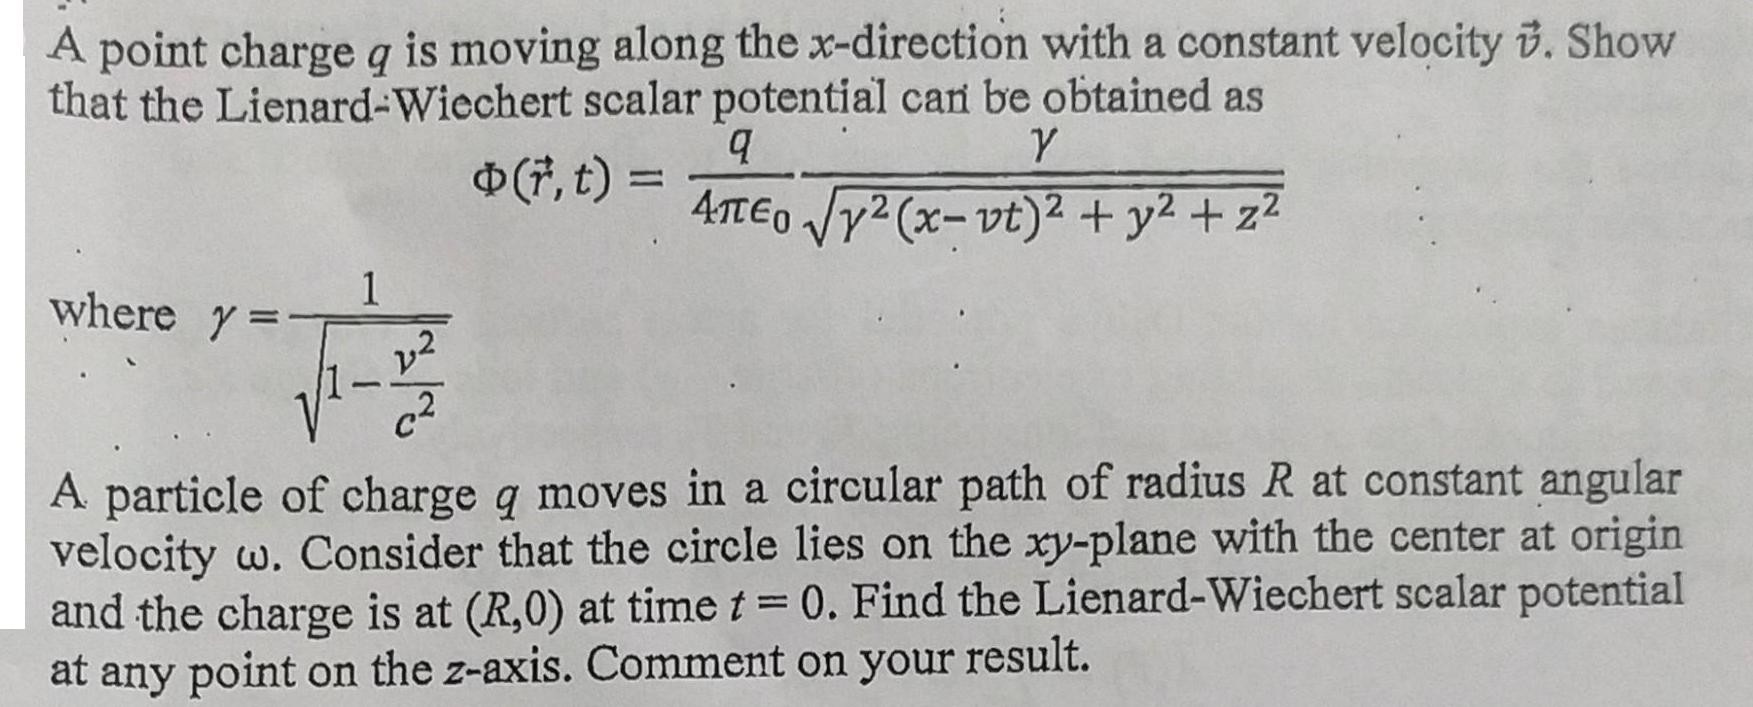 A point charge q is moving along the x-direction with a constant velocity . Show that the Lienard-Wiechert